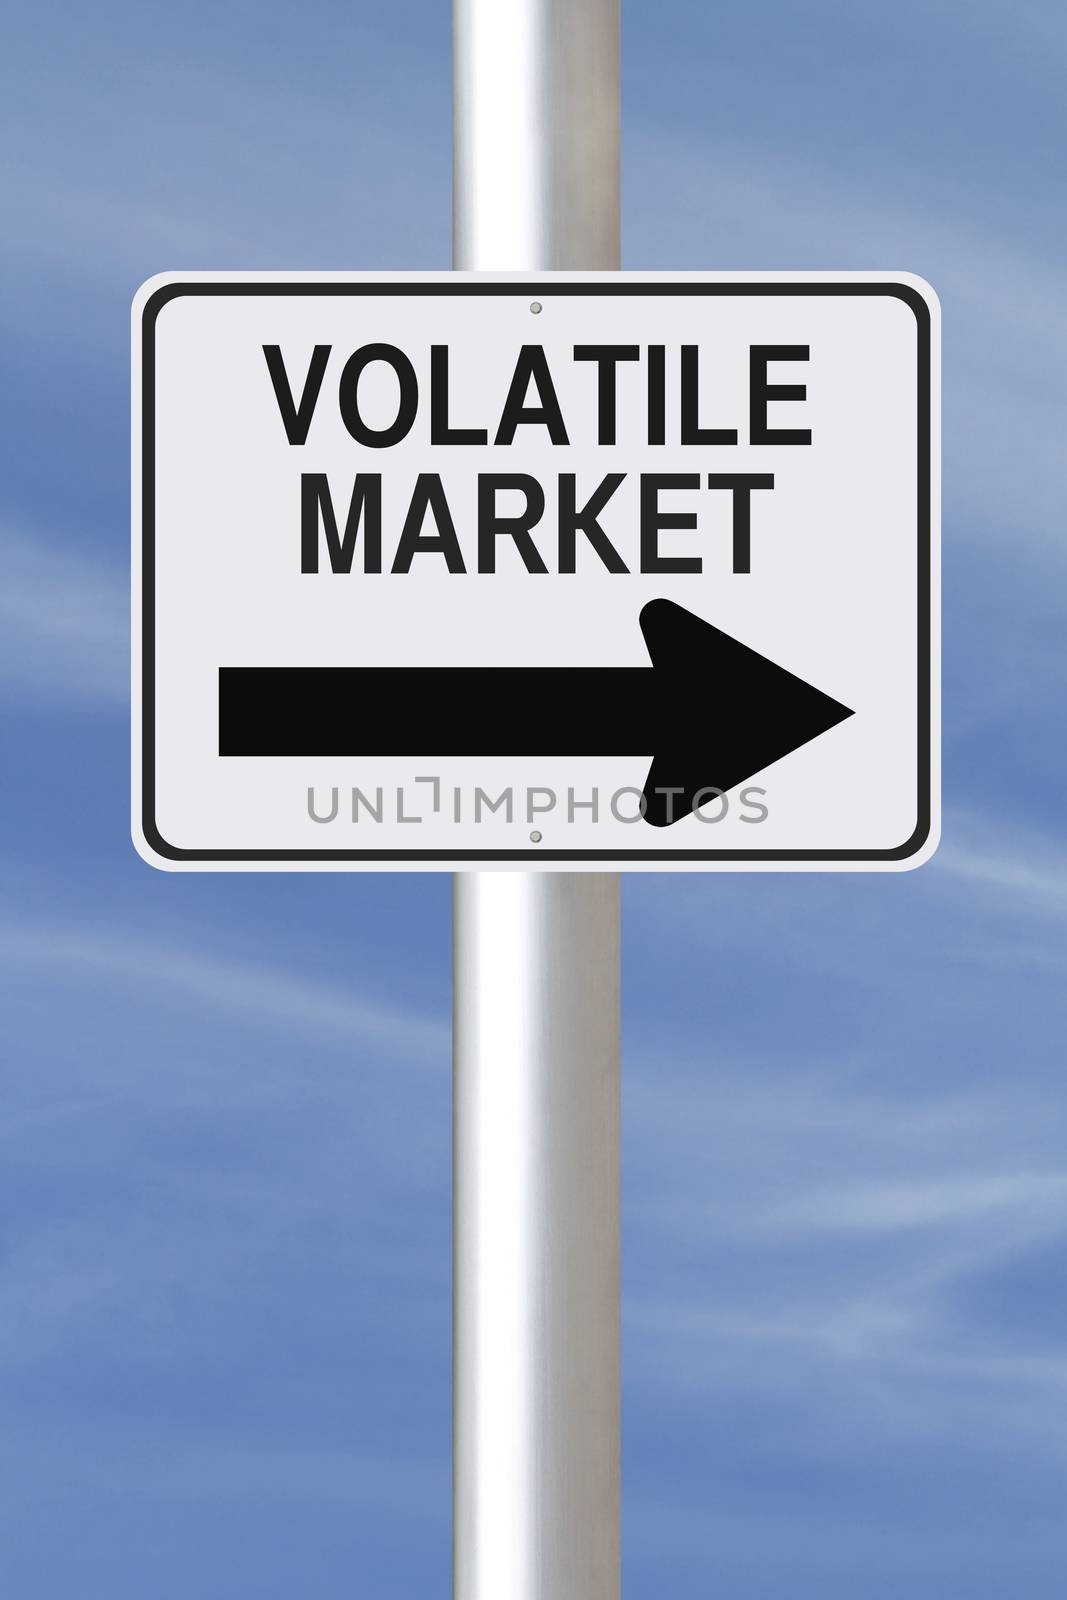 A conceptual one way sign on market volatility